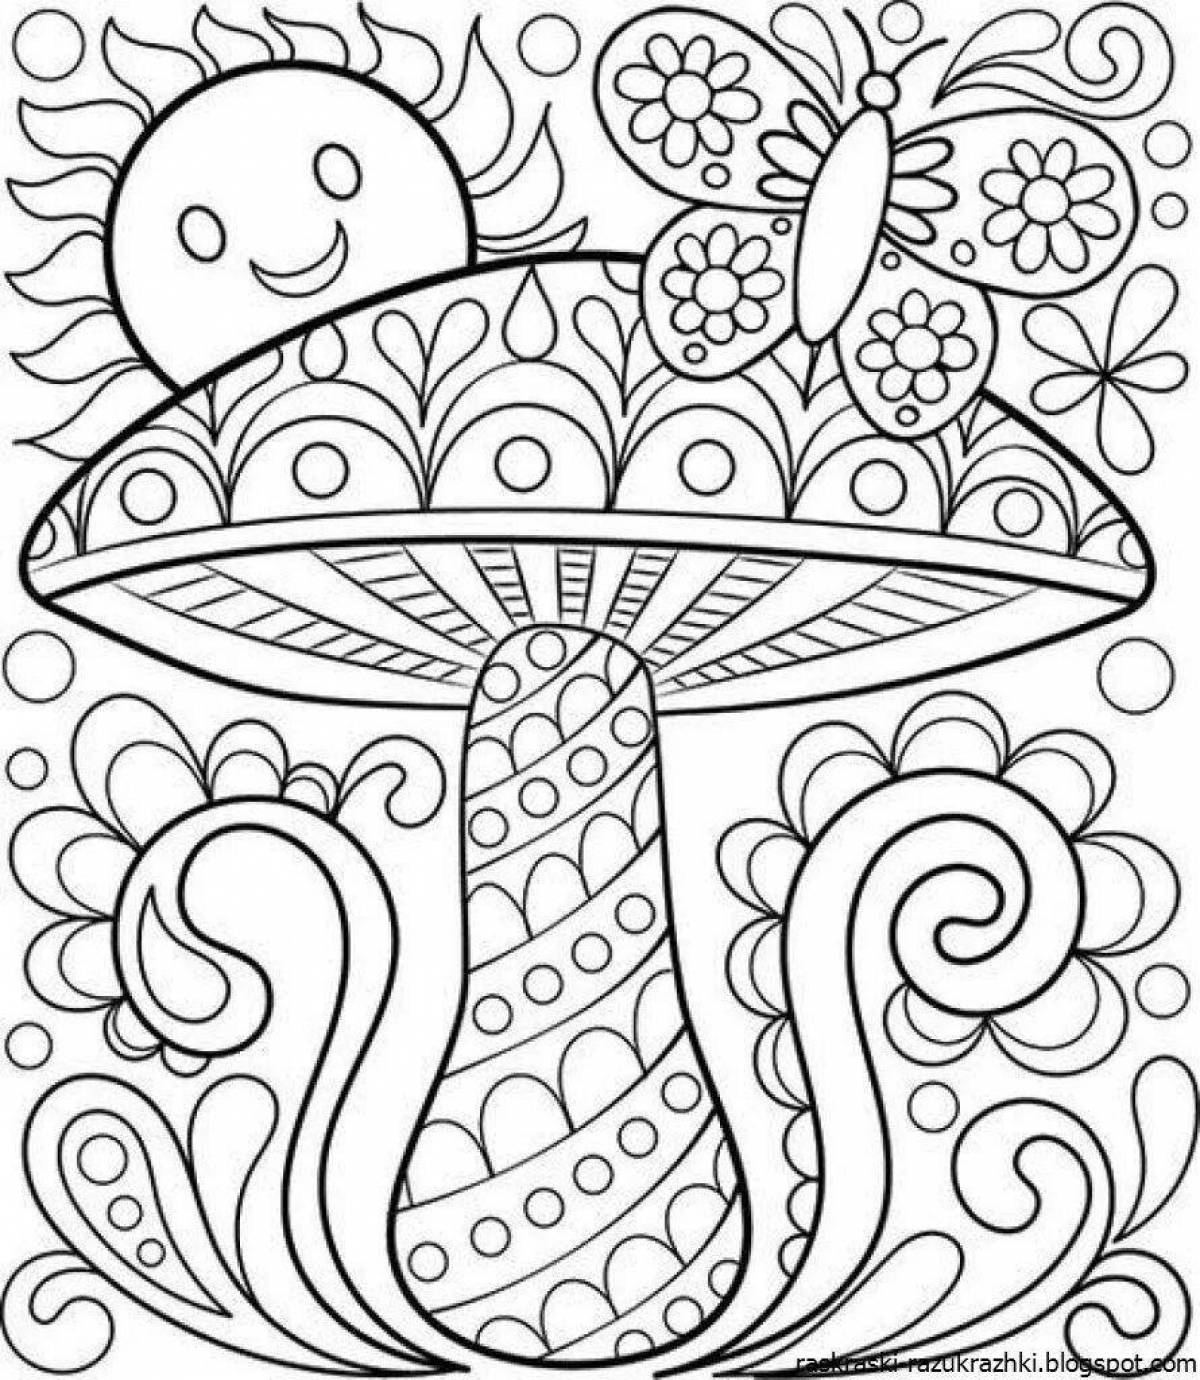 Color anti-stress coloring book for children 5-6 years old